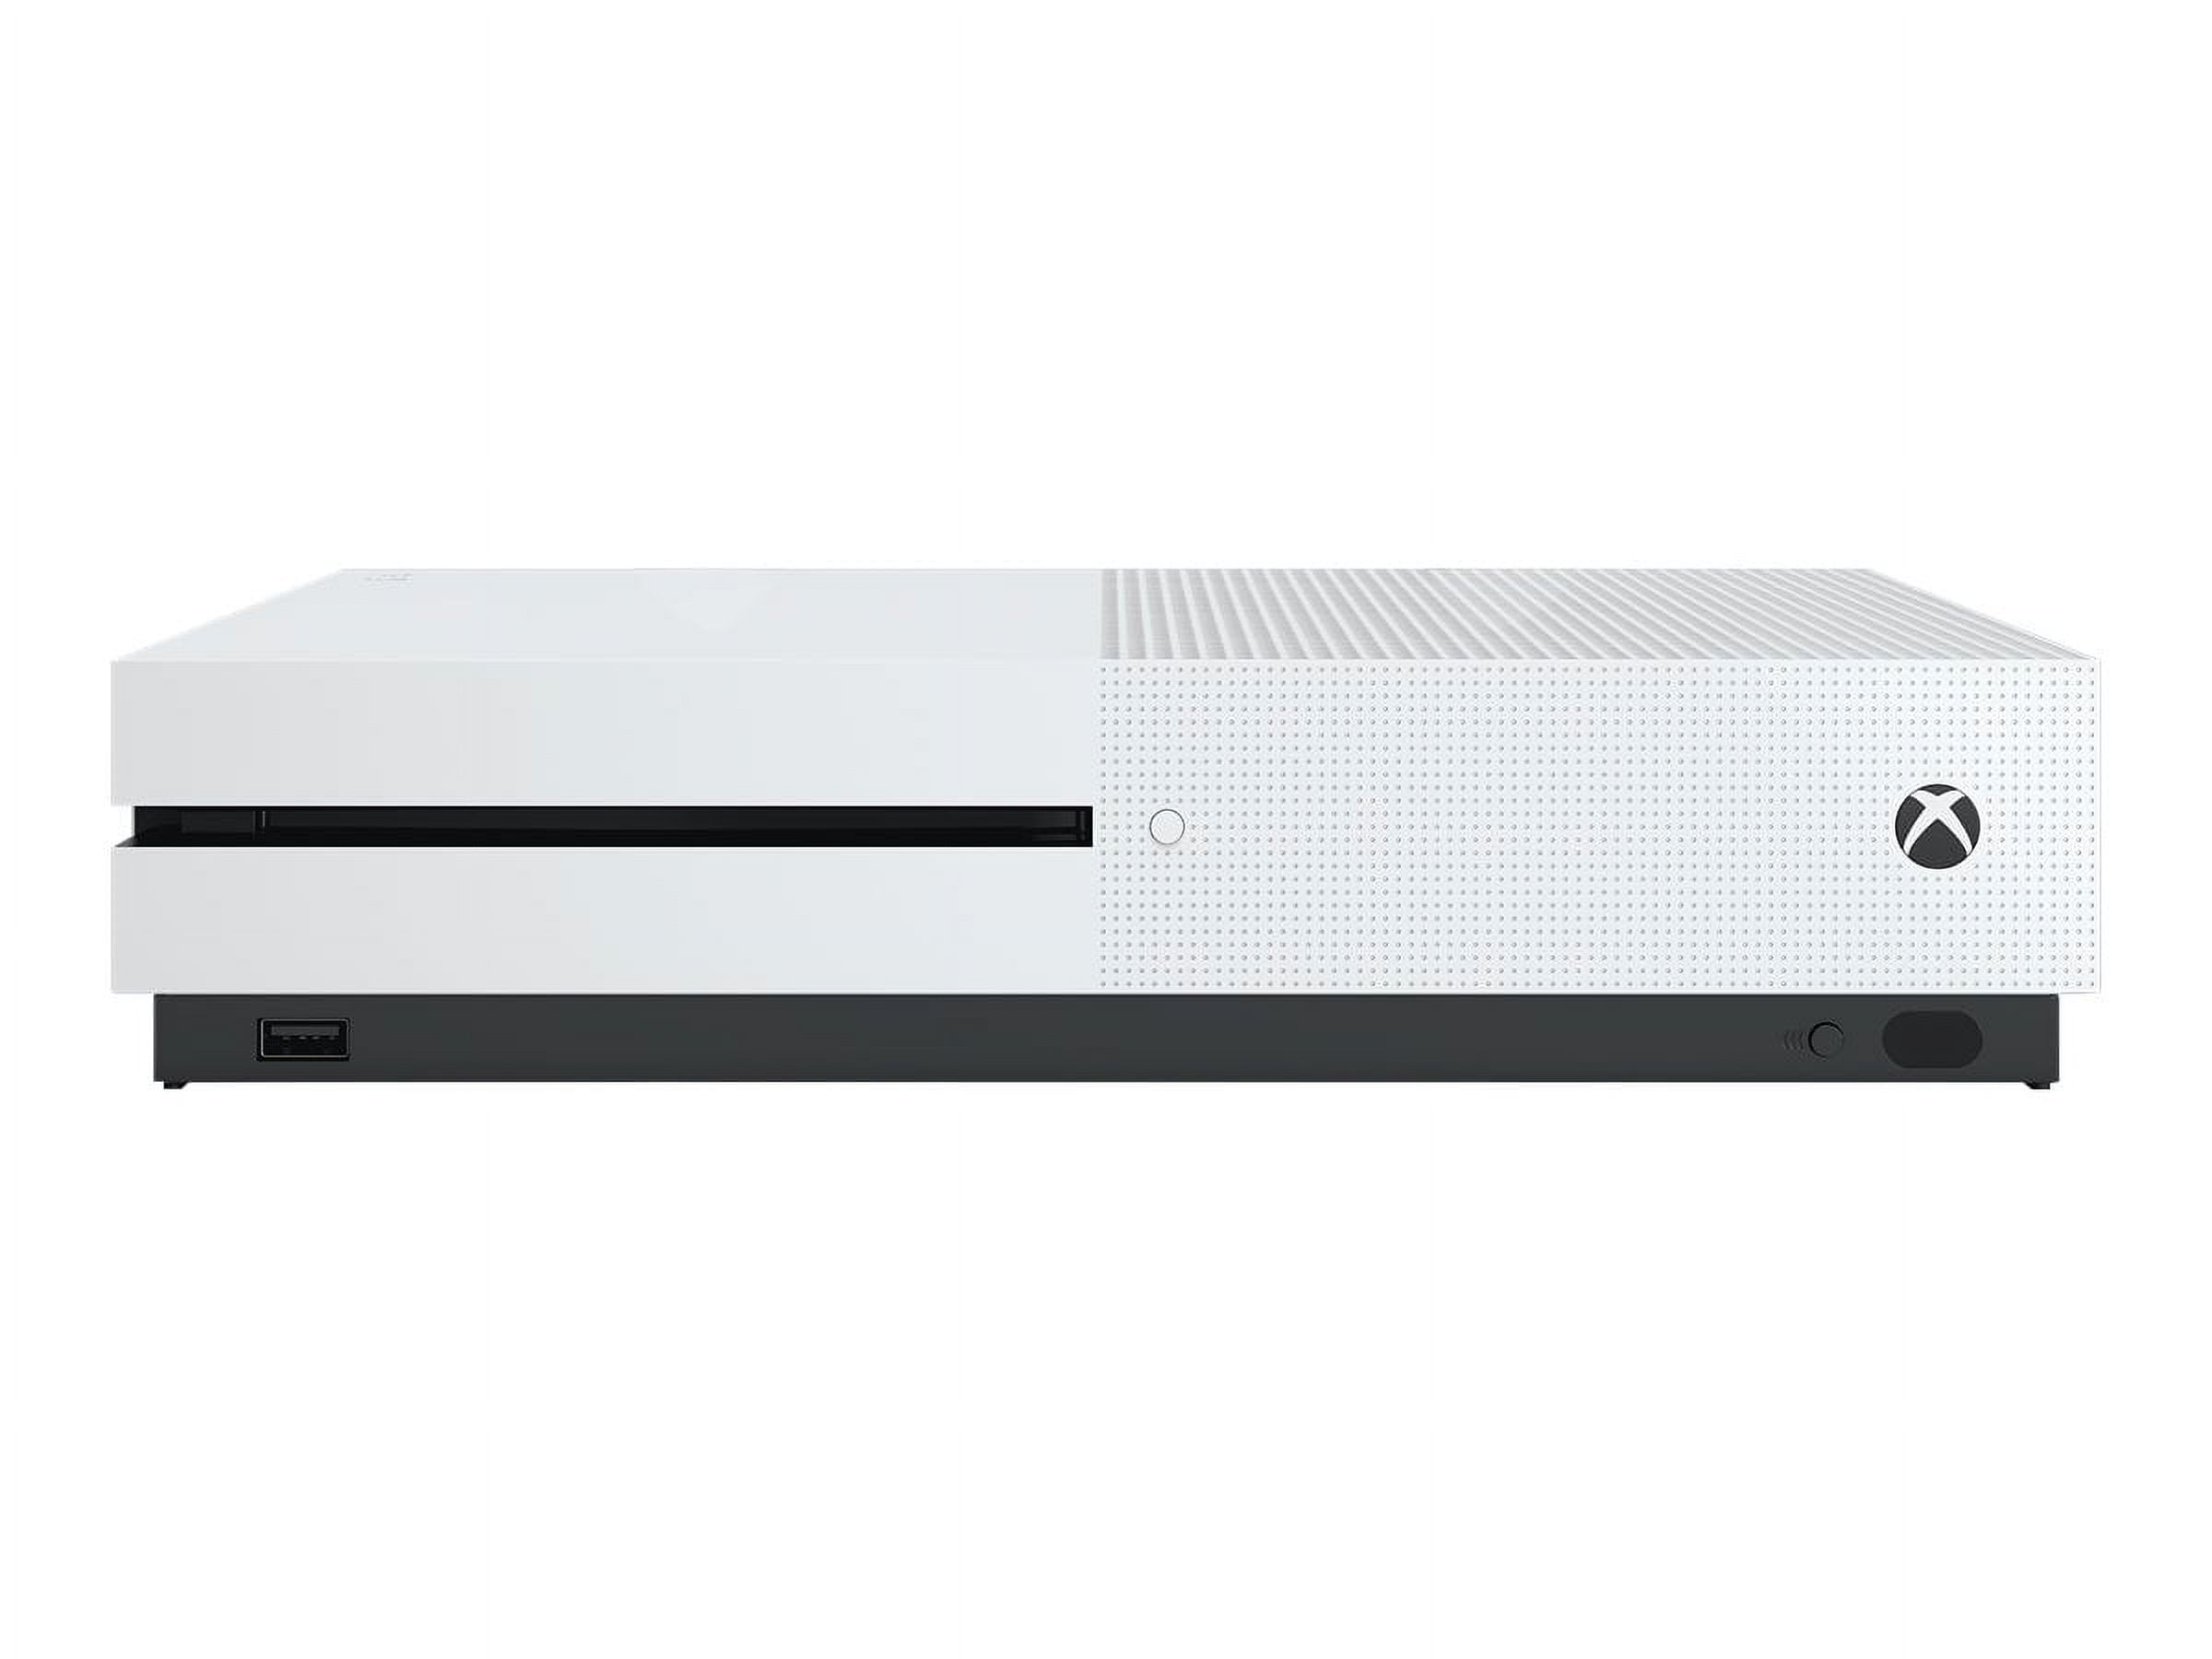 Microsoft Xbox One 500GB White Console - Gears of War: Special